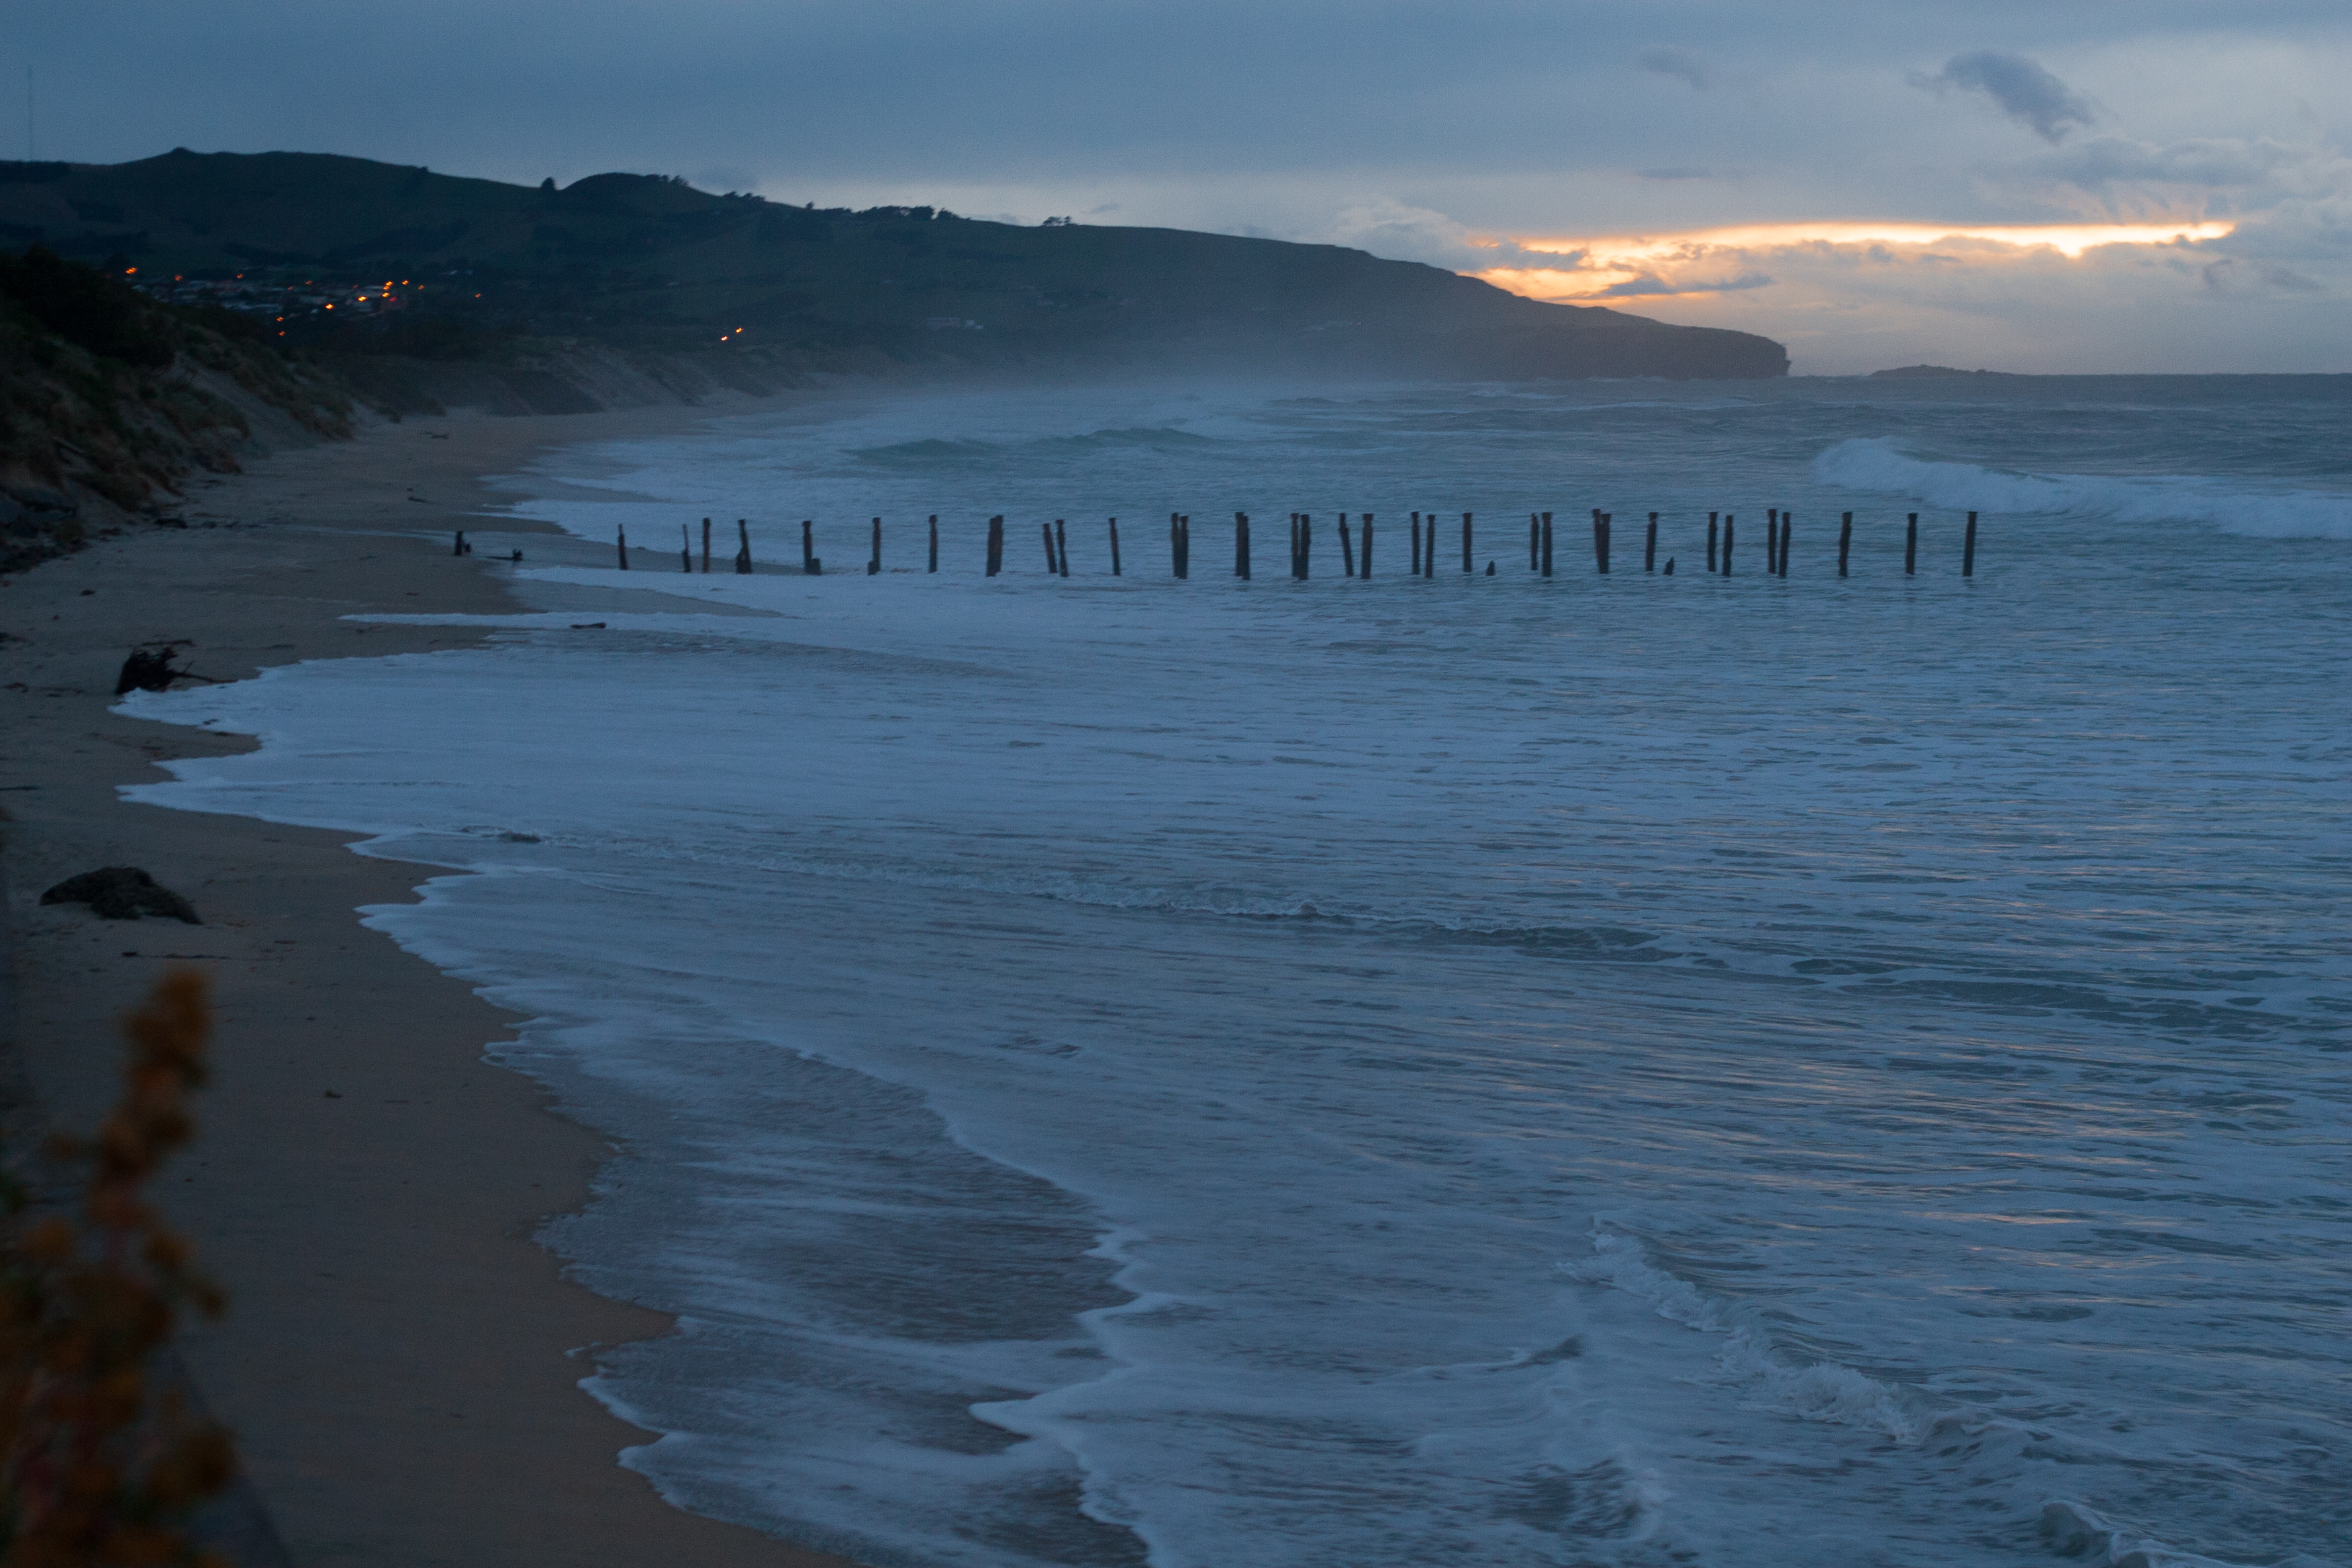 the remains of an old pier visible as the sun rises over the hill near the ocean